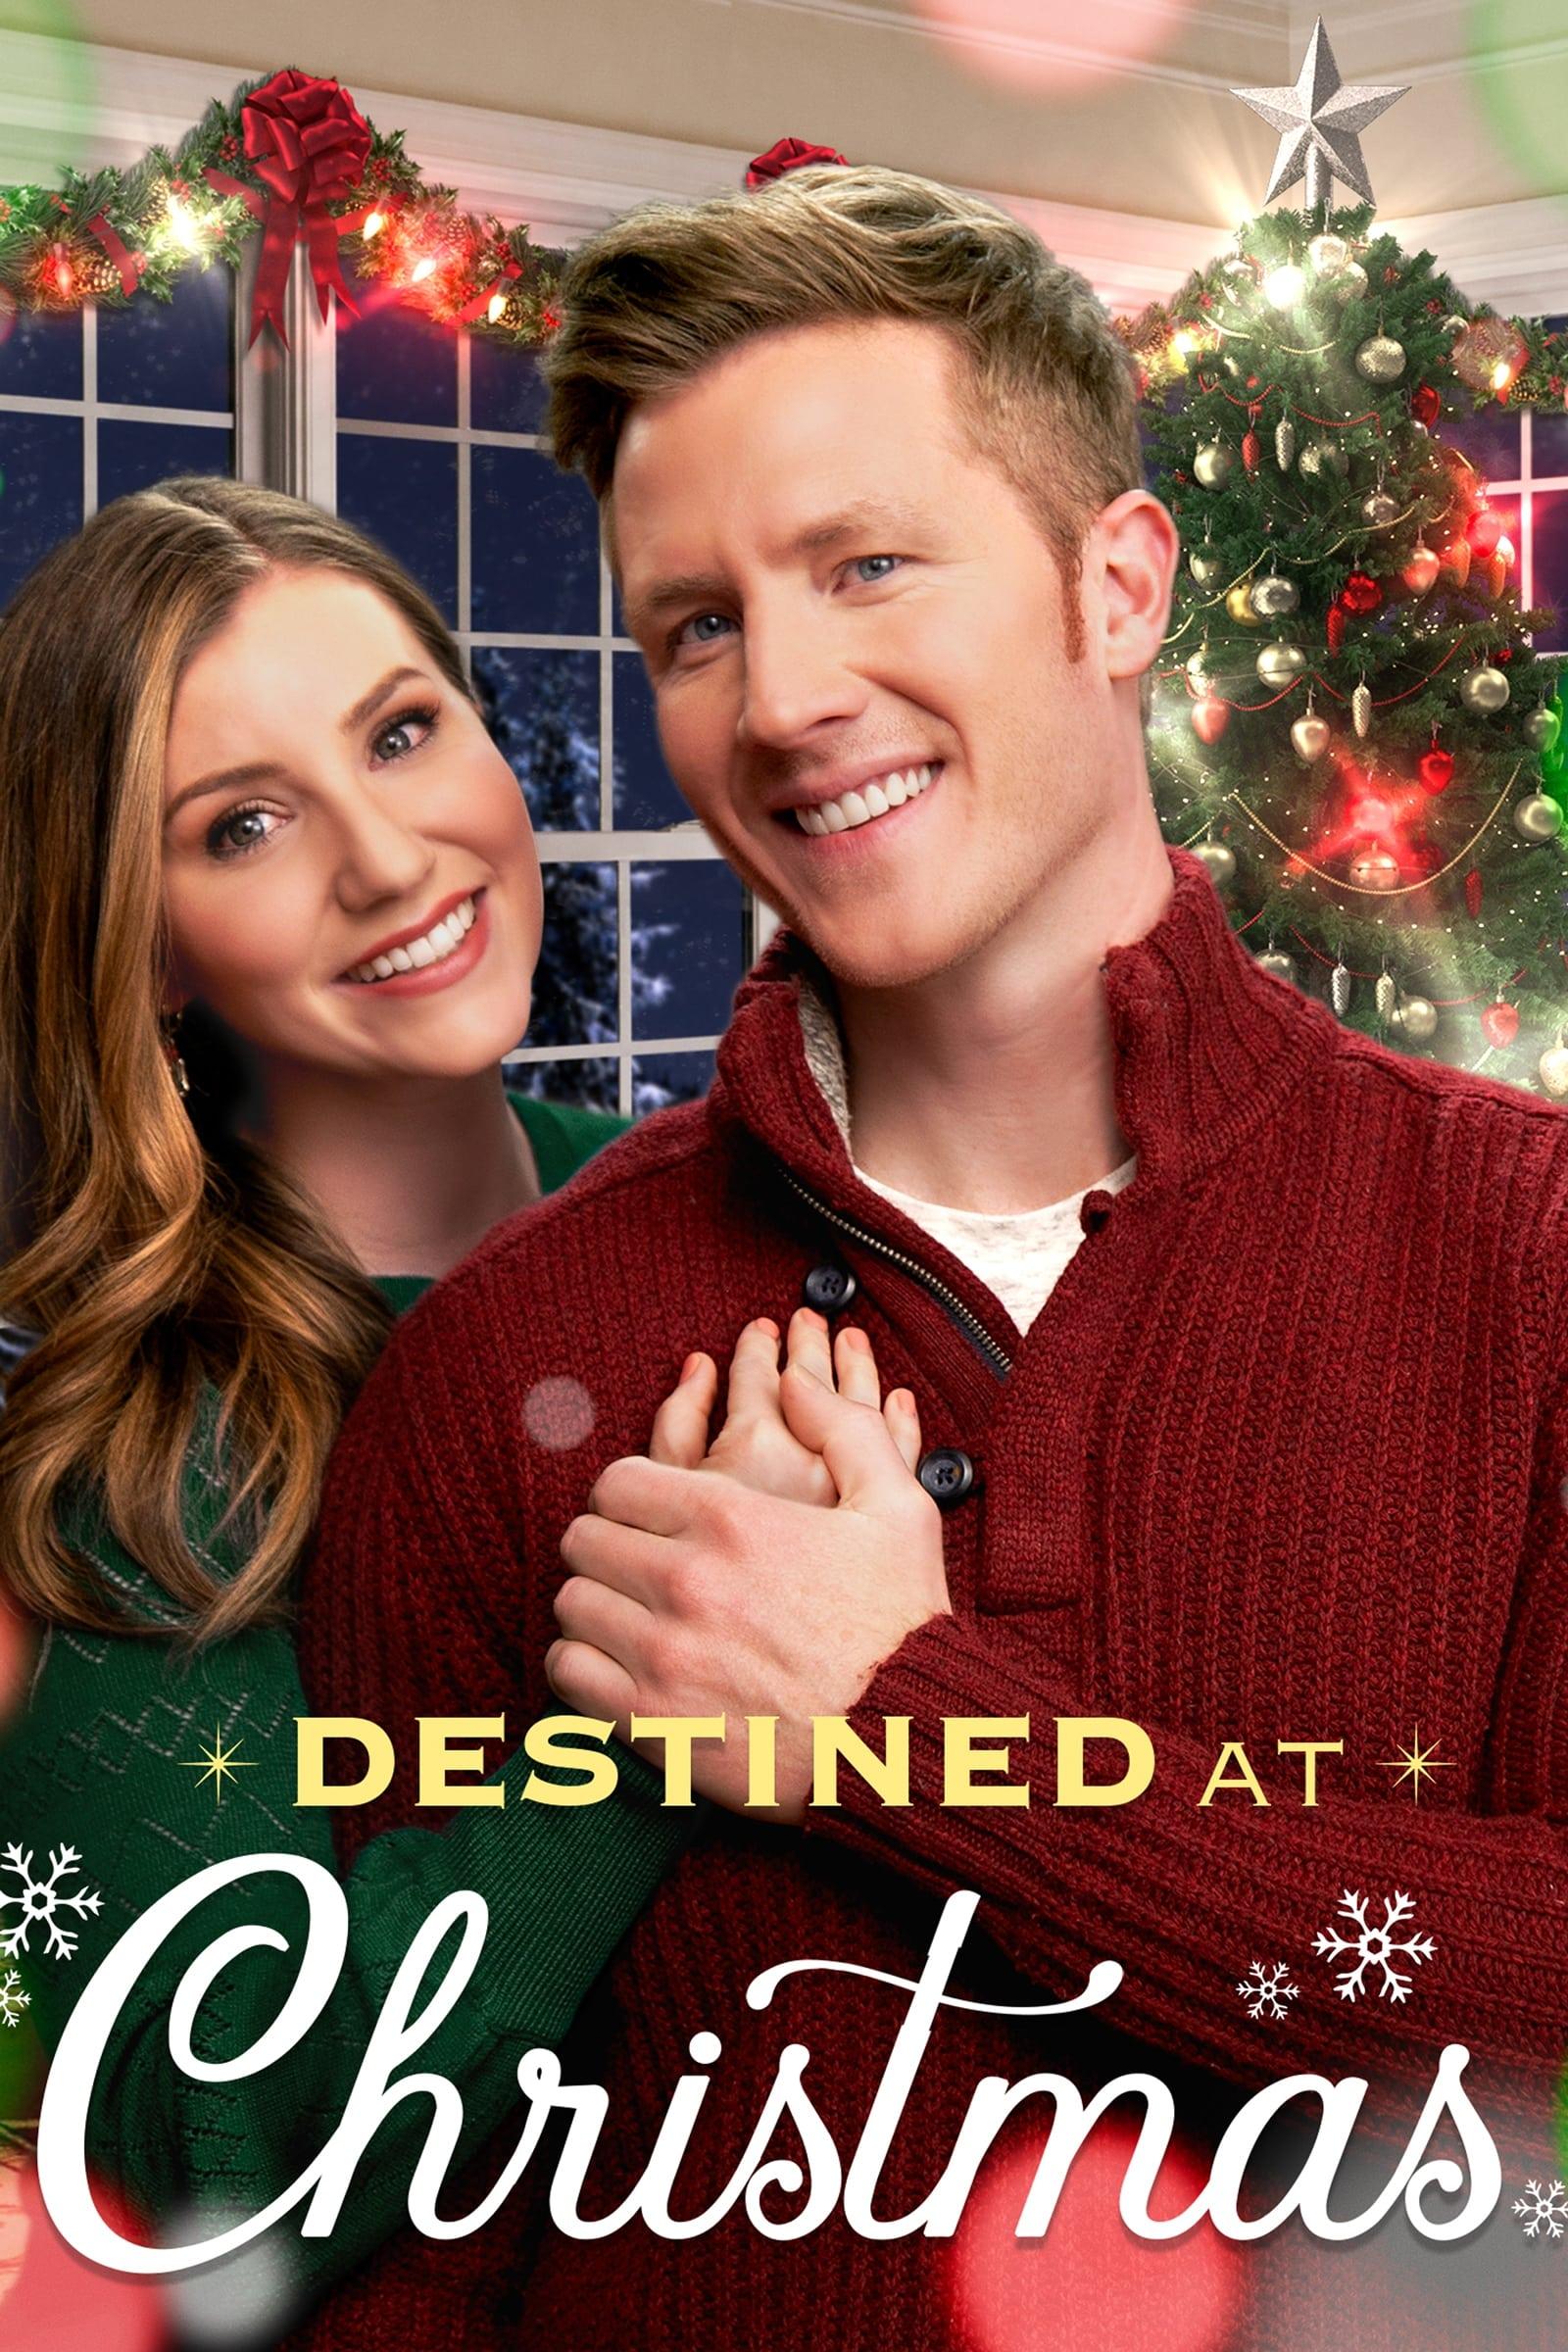 Destined at Christmas poster